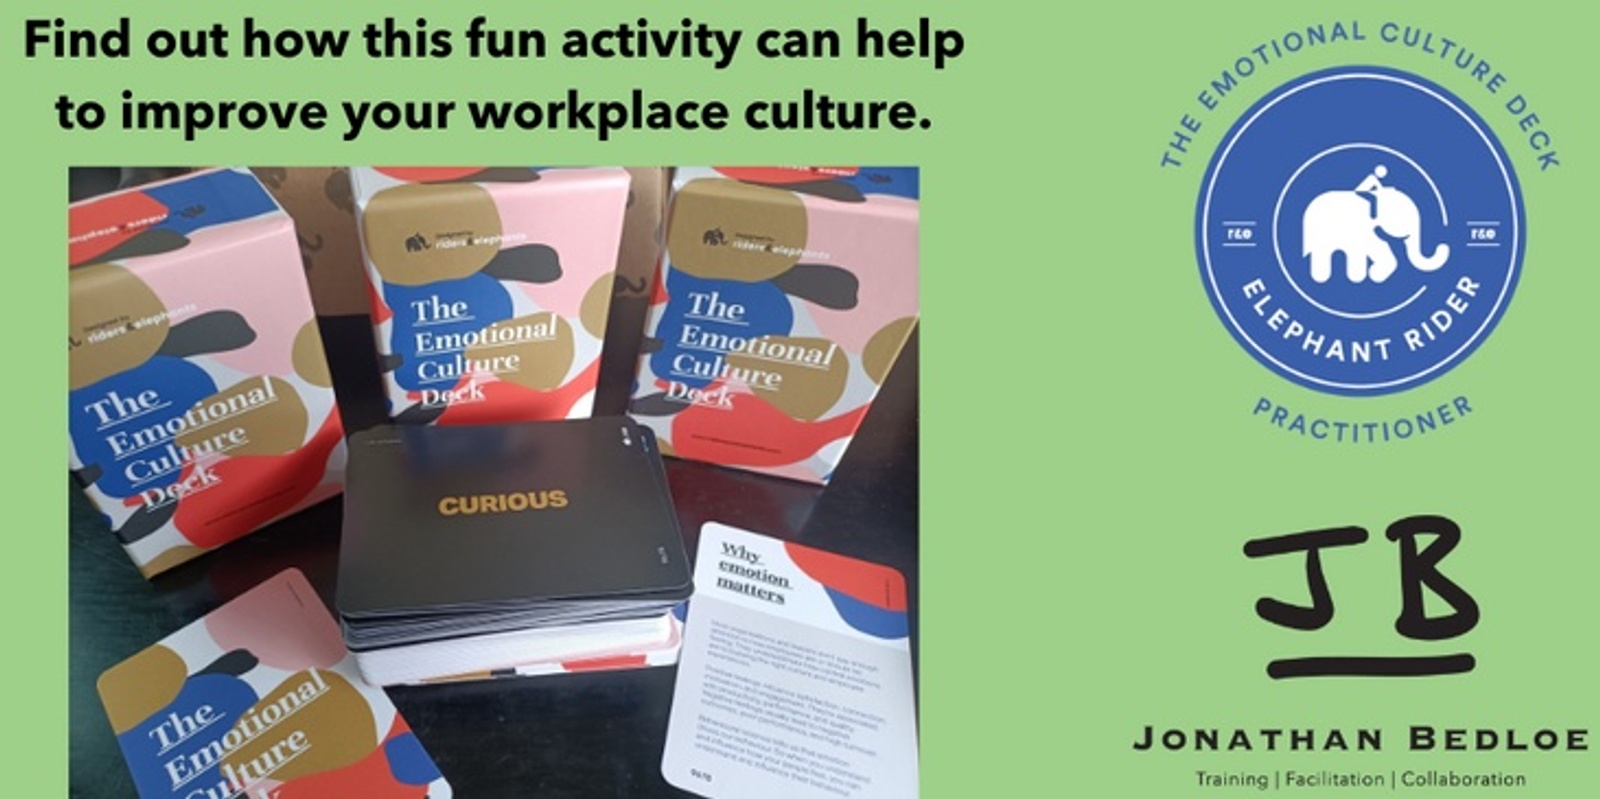 Your workplace culture